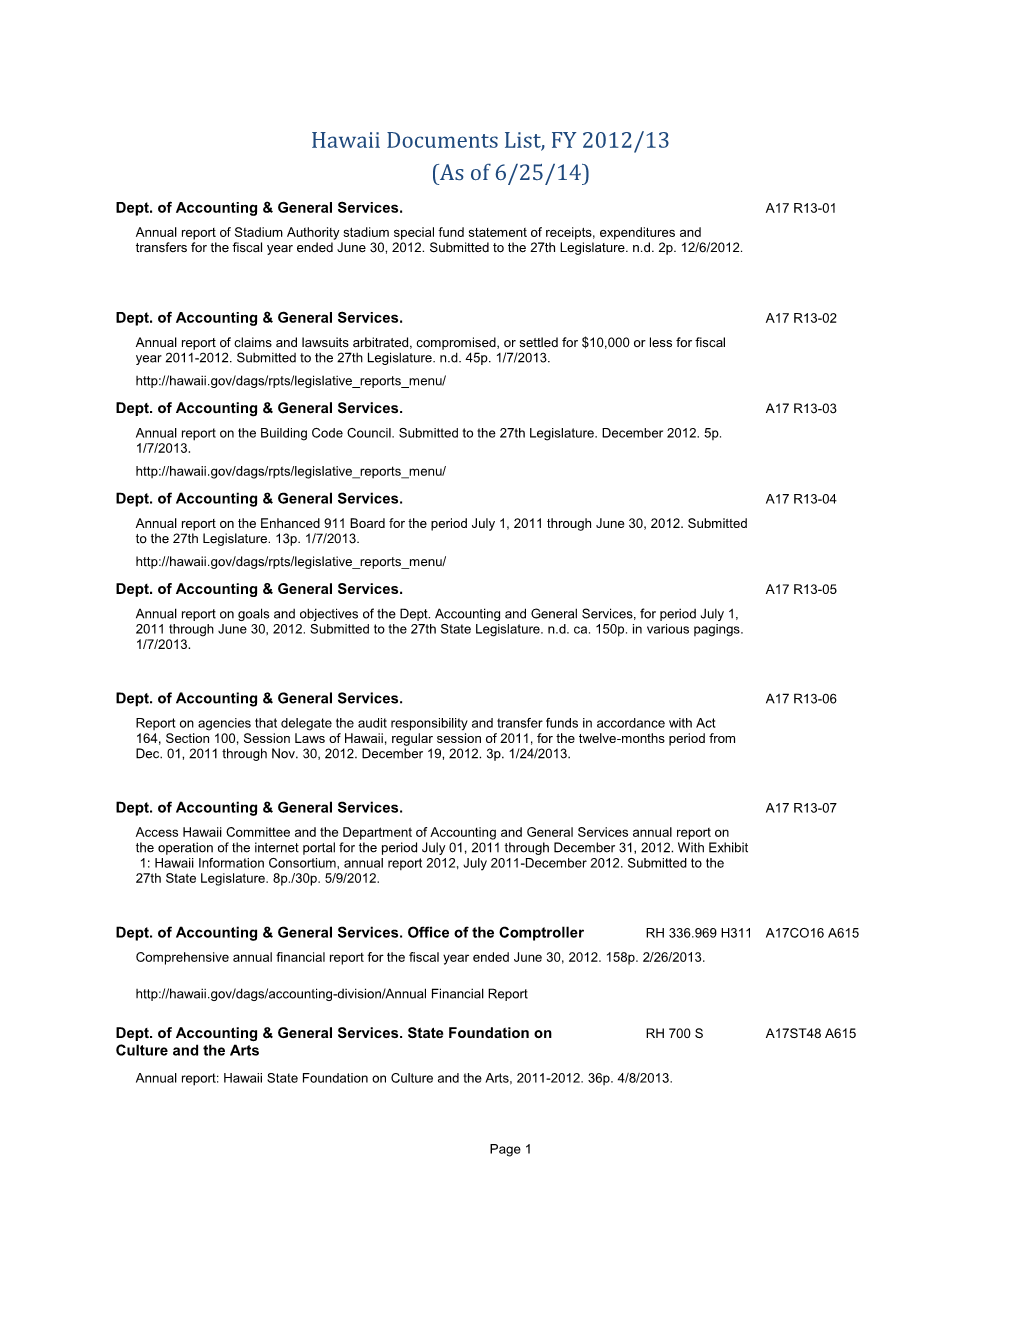 Hawaii Documents List FY 2012 13-Current